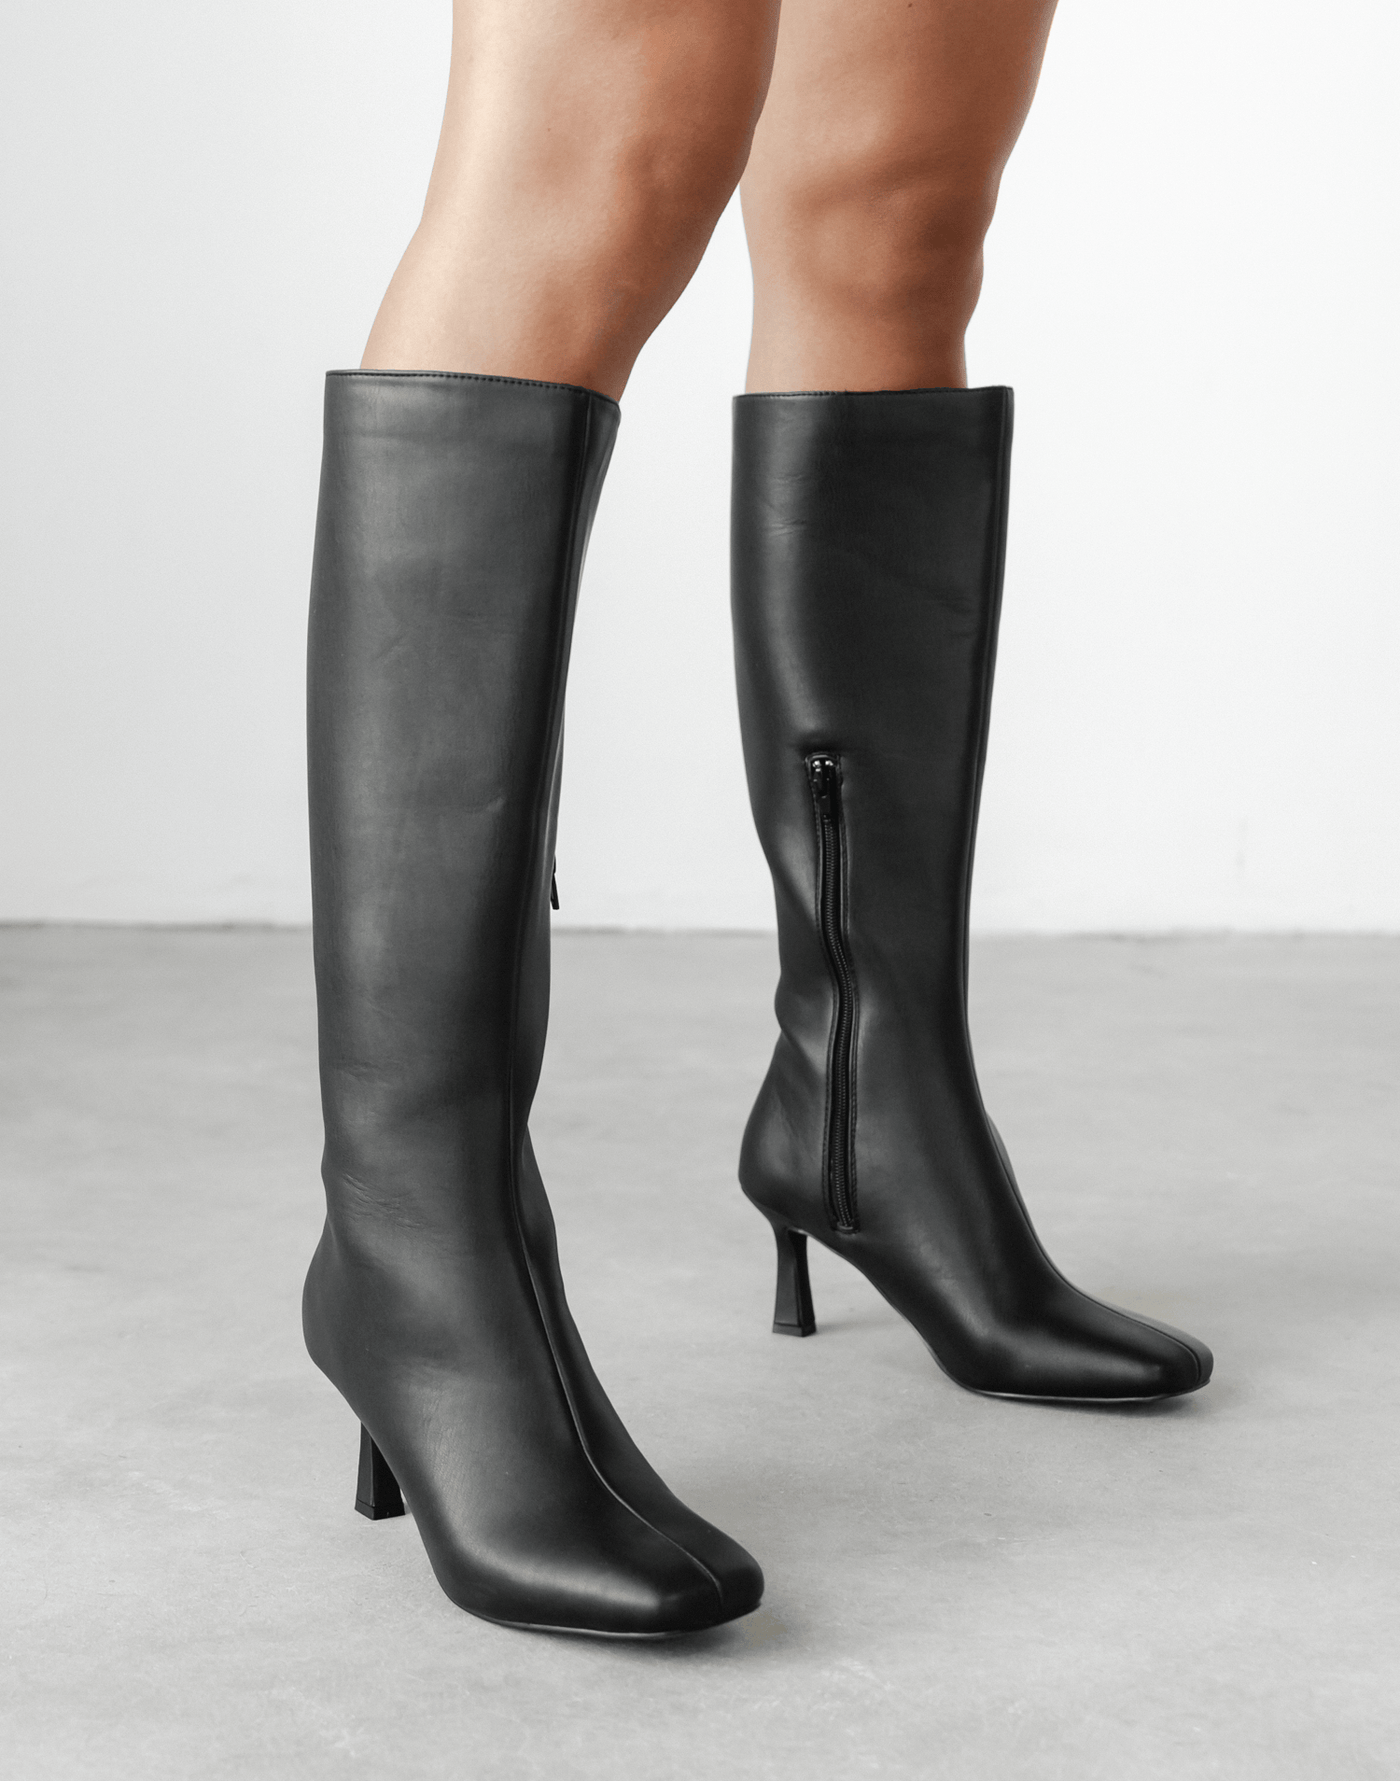 Candid Boots (Black) - By Therapy - Women's Shoes - Charcoal Clothing